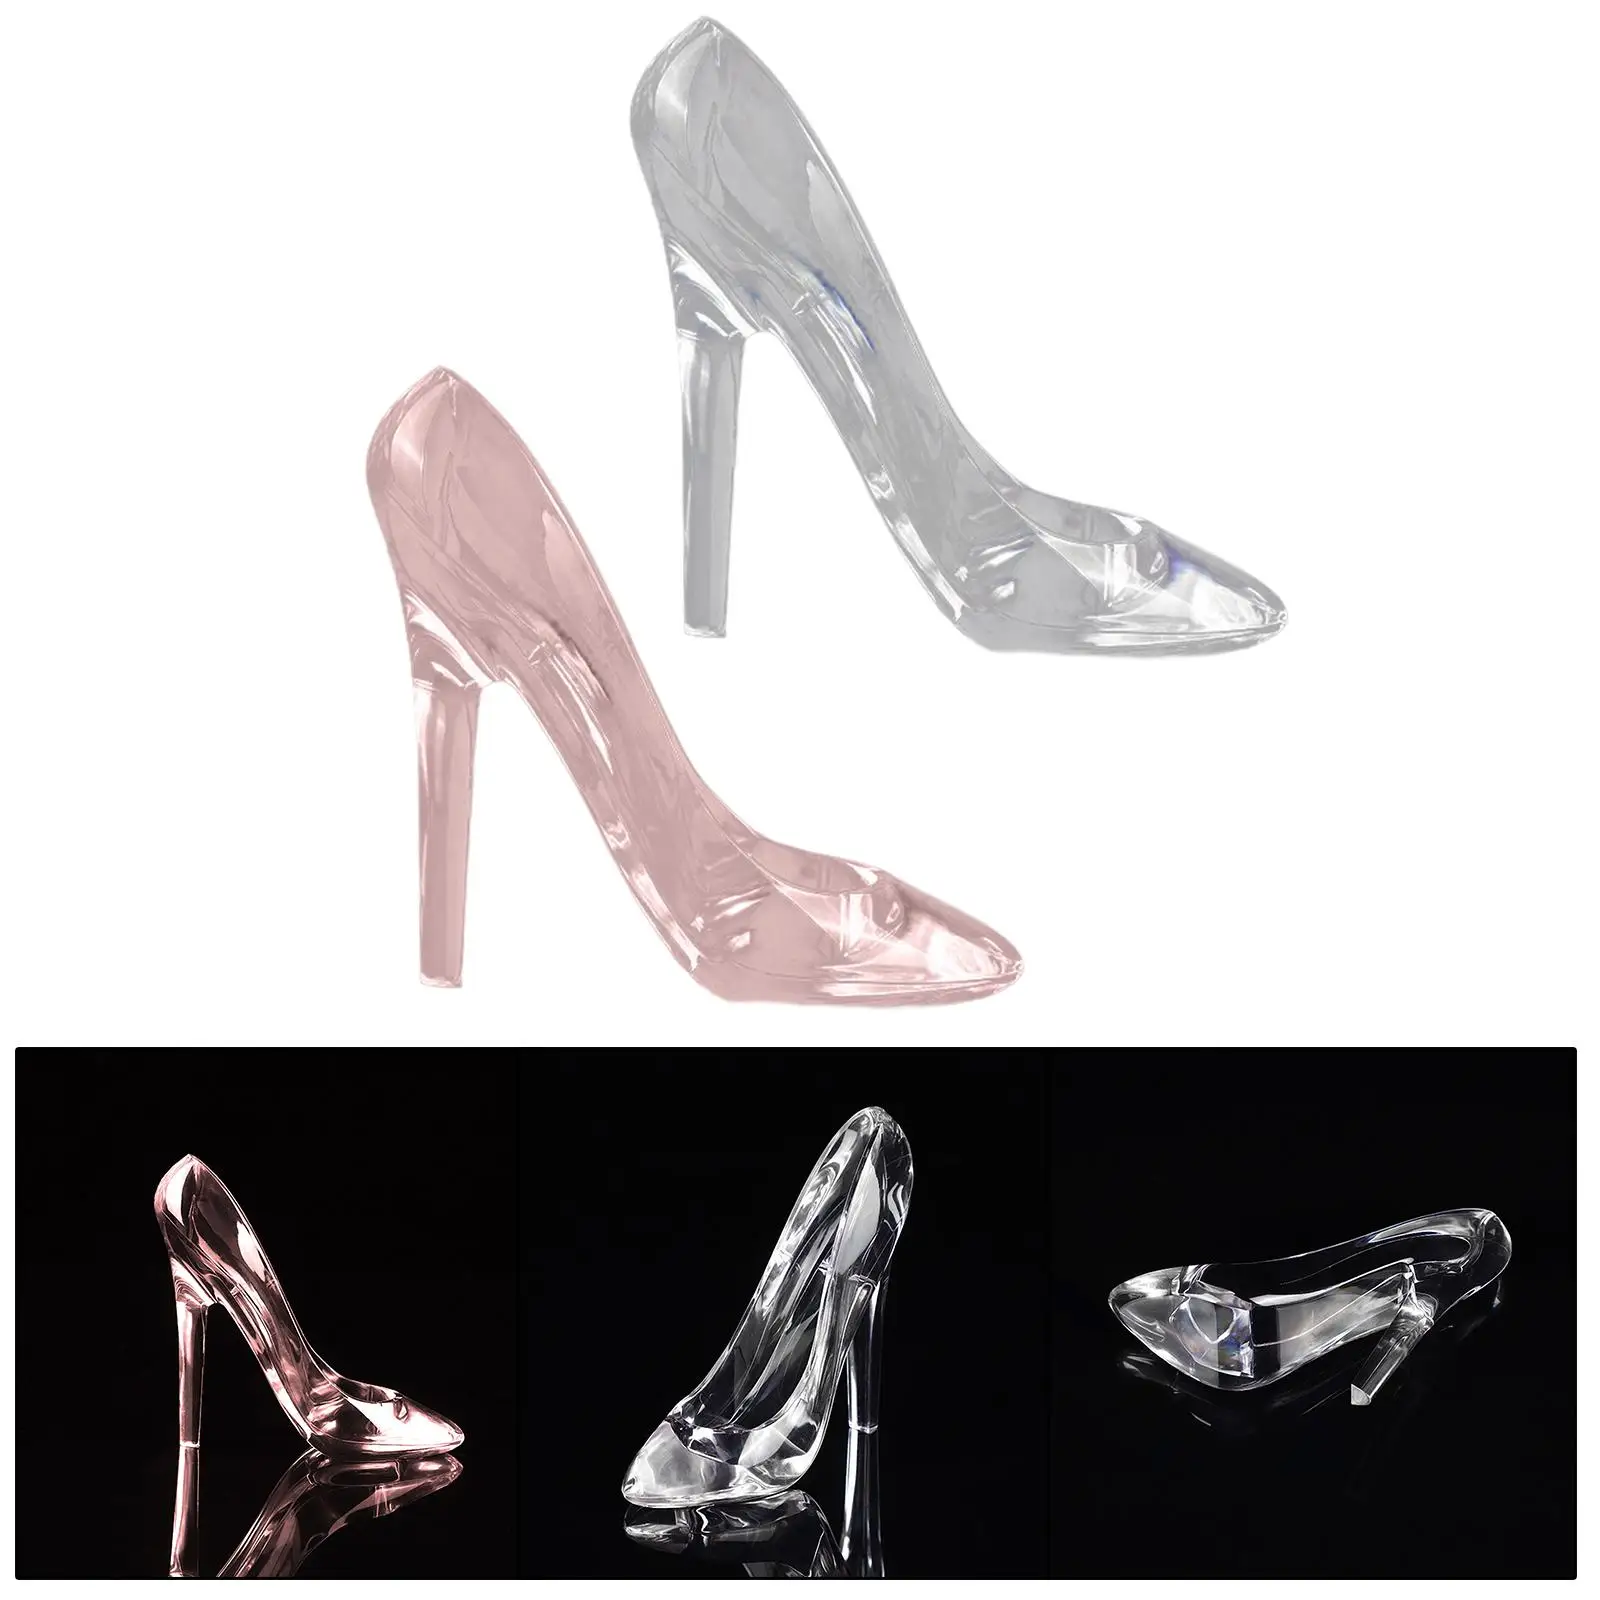 Acrylic Shoes Princess Shoes Candy Holders Decoration Slipper Figurine Home Decor Clear for Wedding Bride Party Halloween Kids